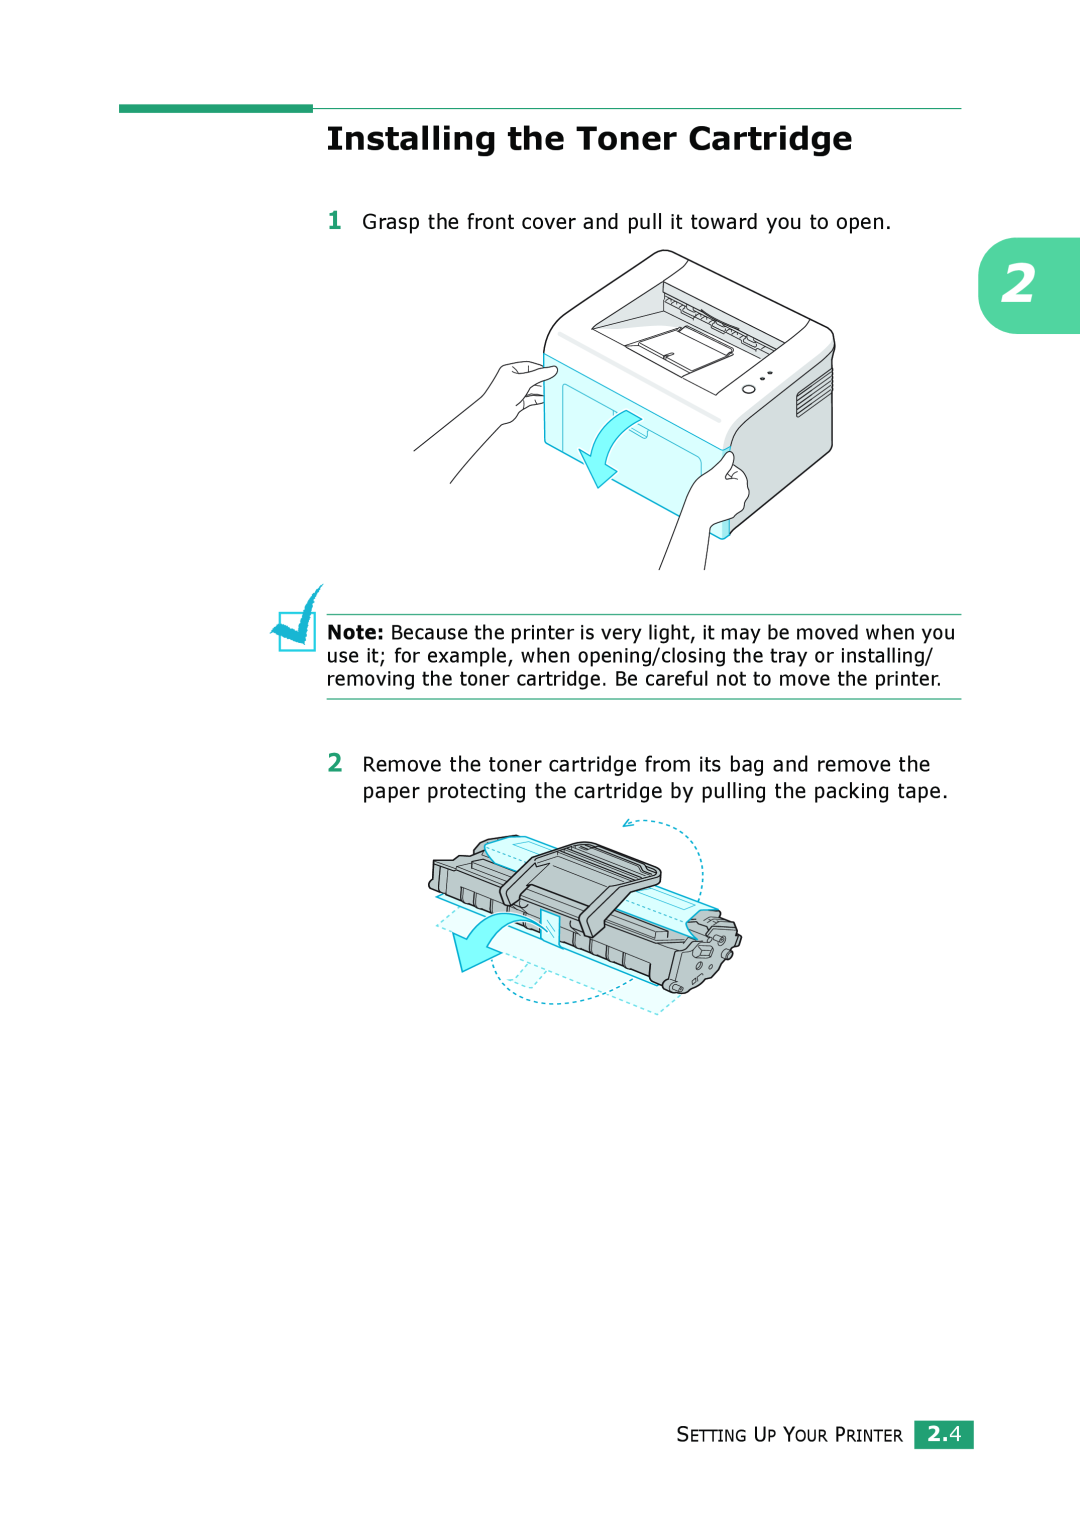 Samsung ML-1610 manual Installing the Toner Cartridge, Grasp the front cover and pull it toward you to open 